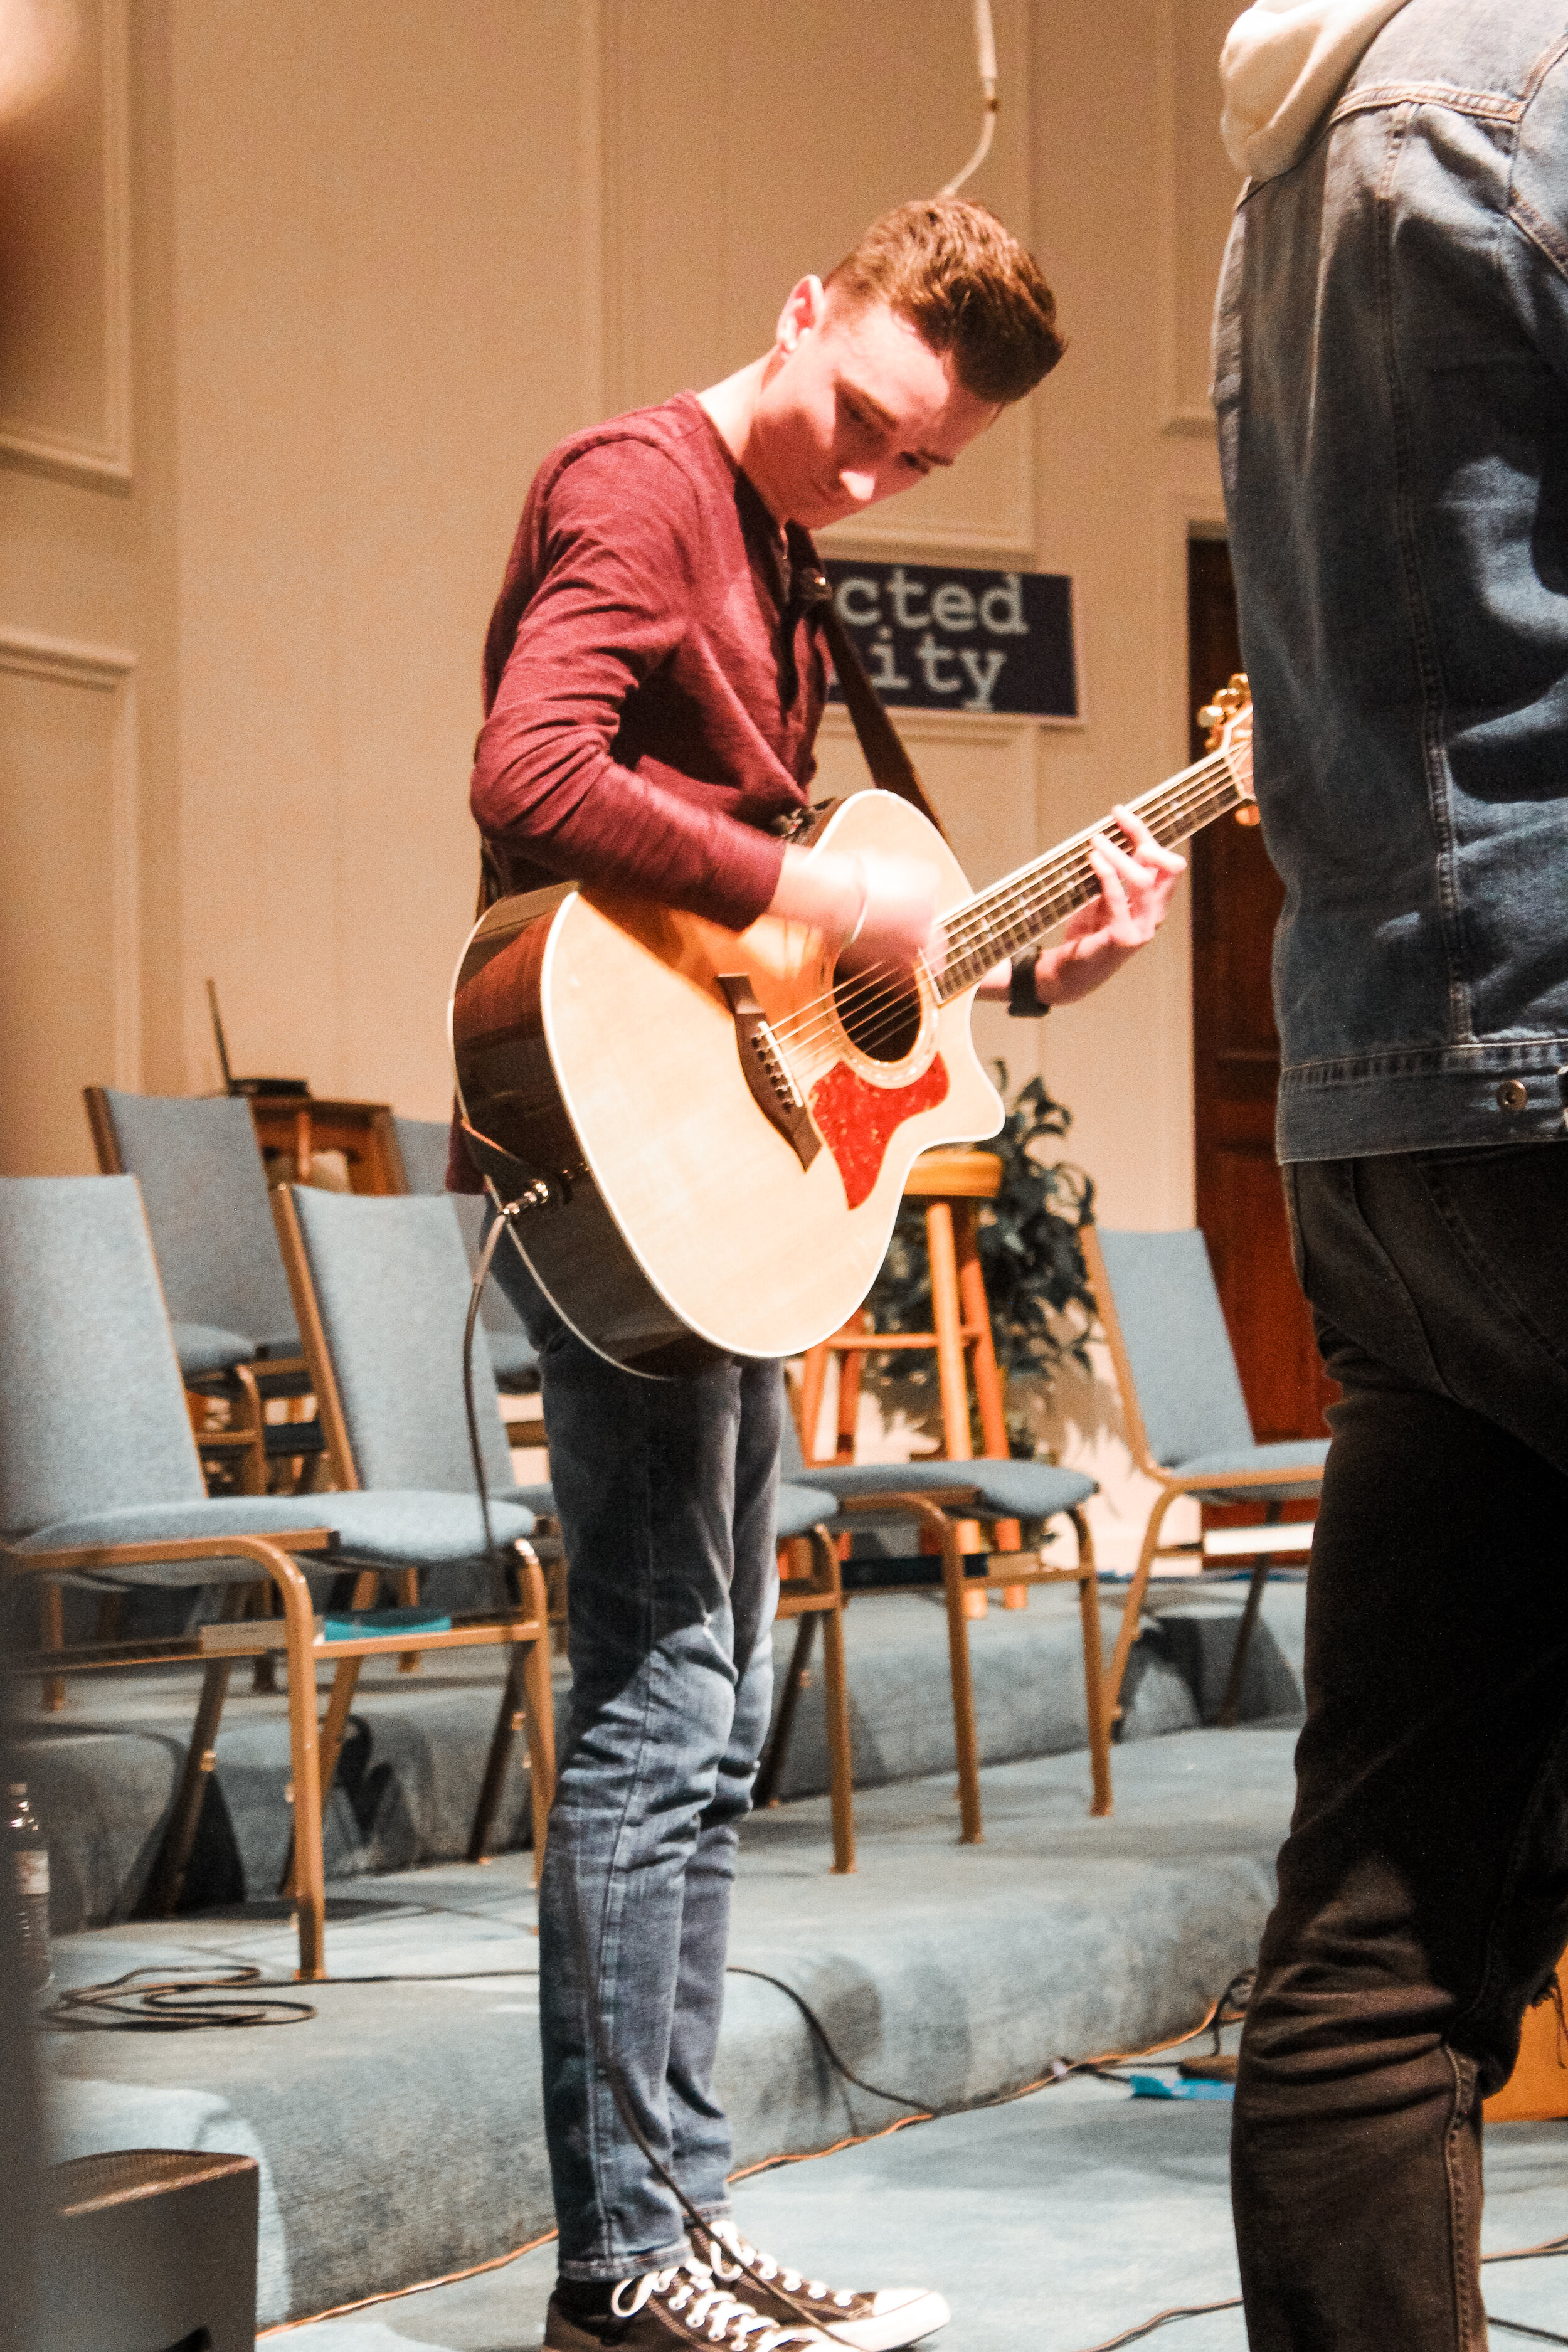 Sophomore Bryson Meece plays acoustic guitar while leading worship with the BCM band.